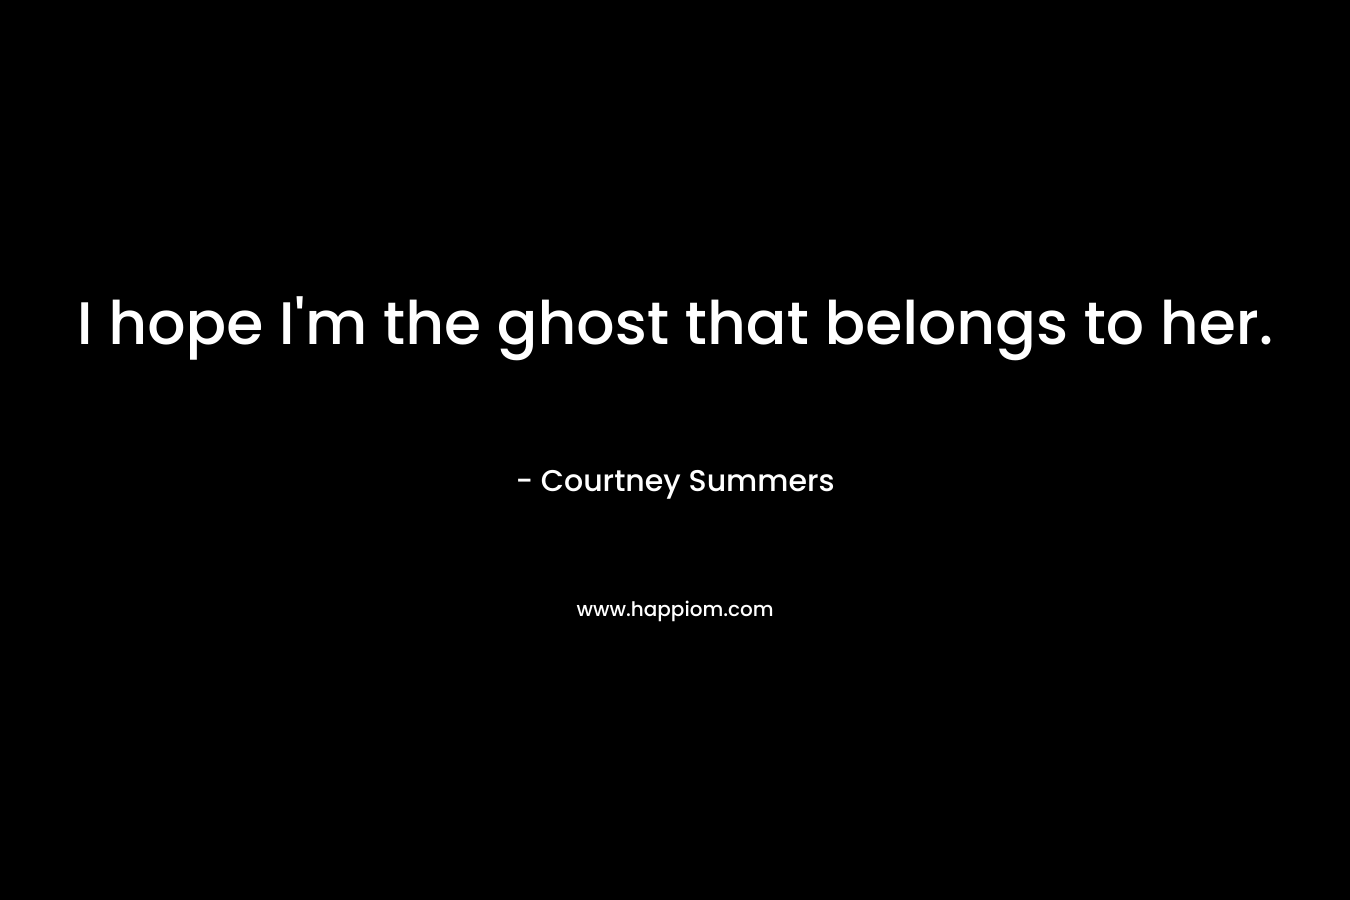 I hope I'm the ghost that belongs to her.